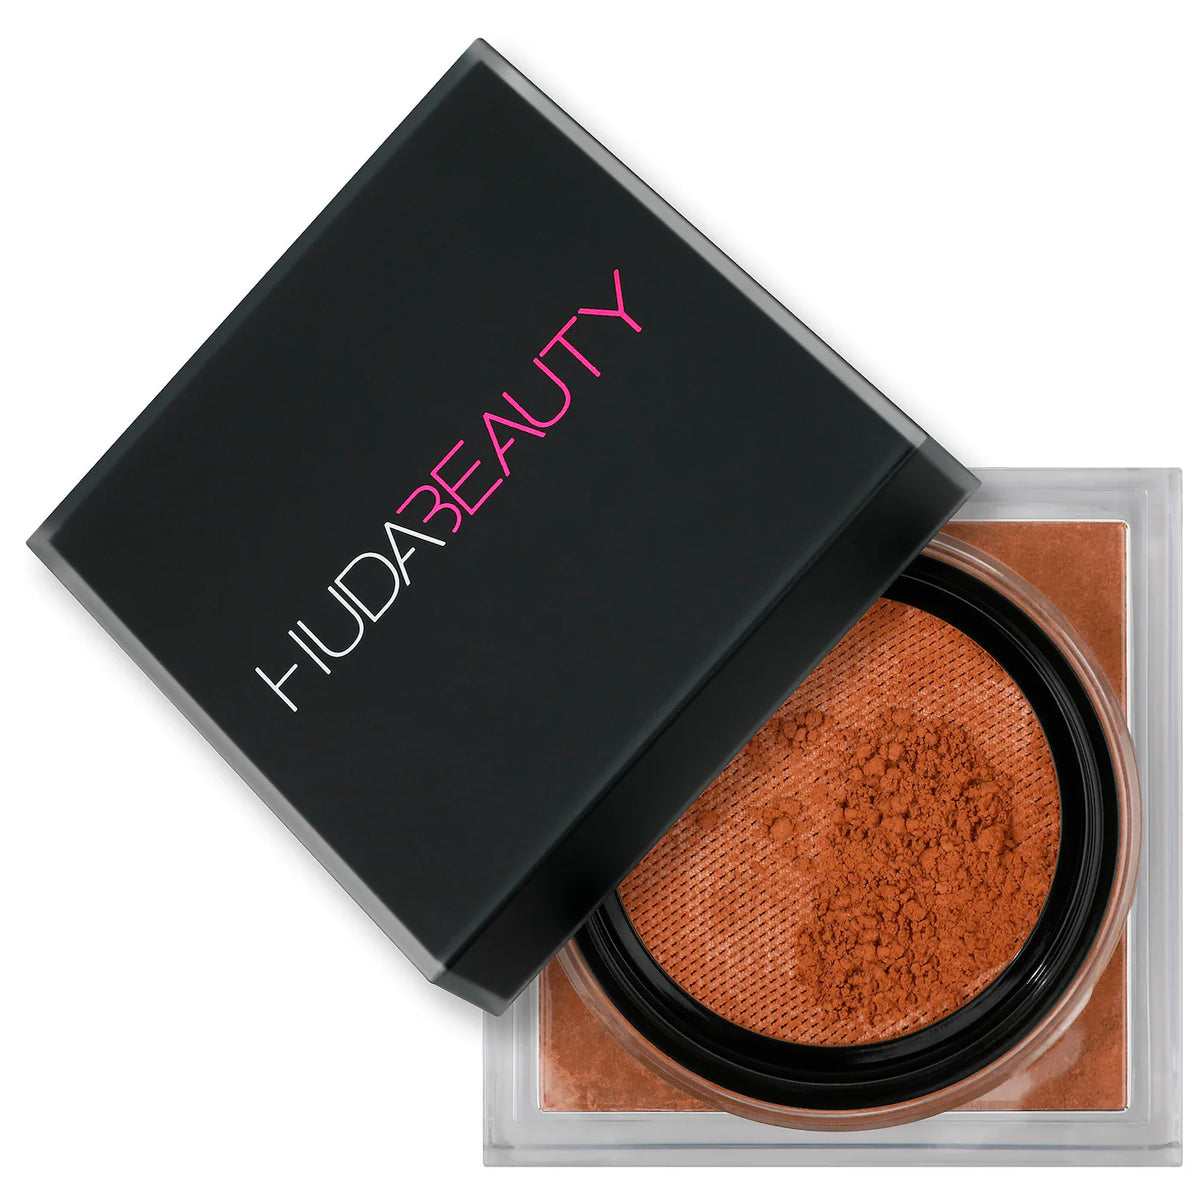 Huda Beauty Easy Bake Loose Baking & Setting Powder Full size Setting powder Huda Beauty Coffee Cake - rich skin tones. golden and red undertones brighten and disguise under-eye darkness.  